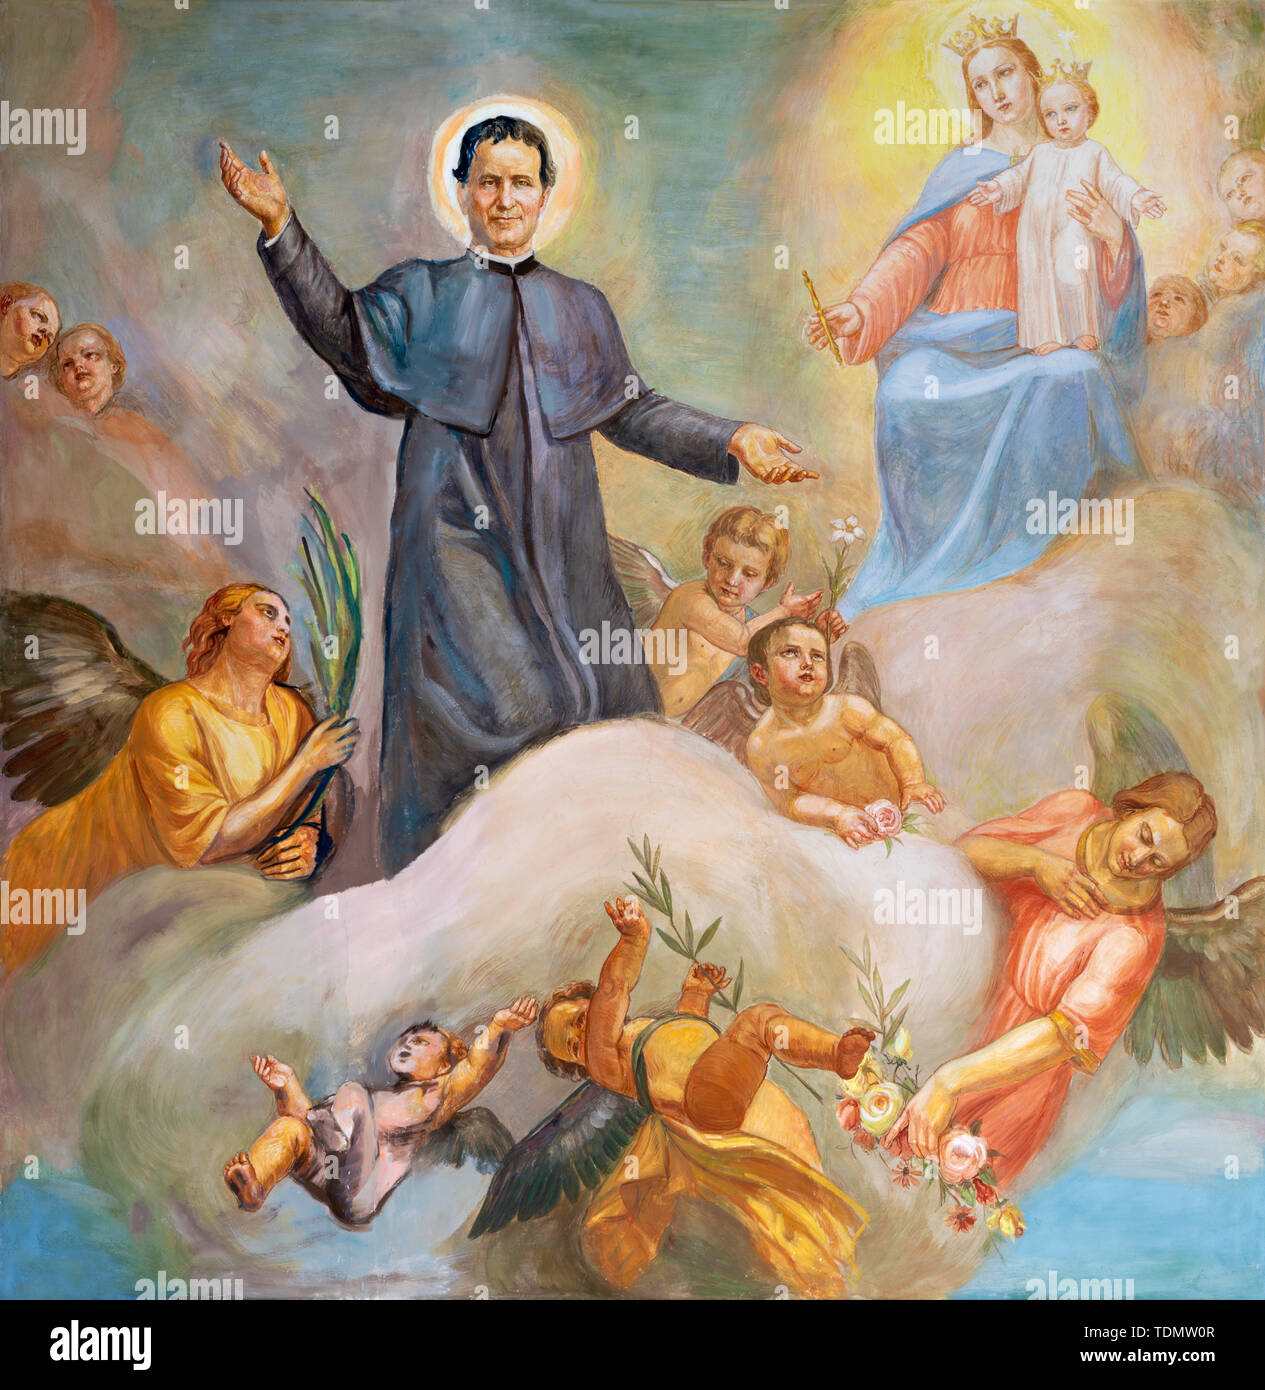 CATANIA, ITALY - APRIL 8, 2018: The painting of Don Bosco and Mary Help of Christians in the church Chiesa di San Filipo Neri by Giuseppe Barone. Stock Photo